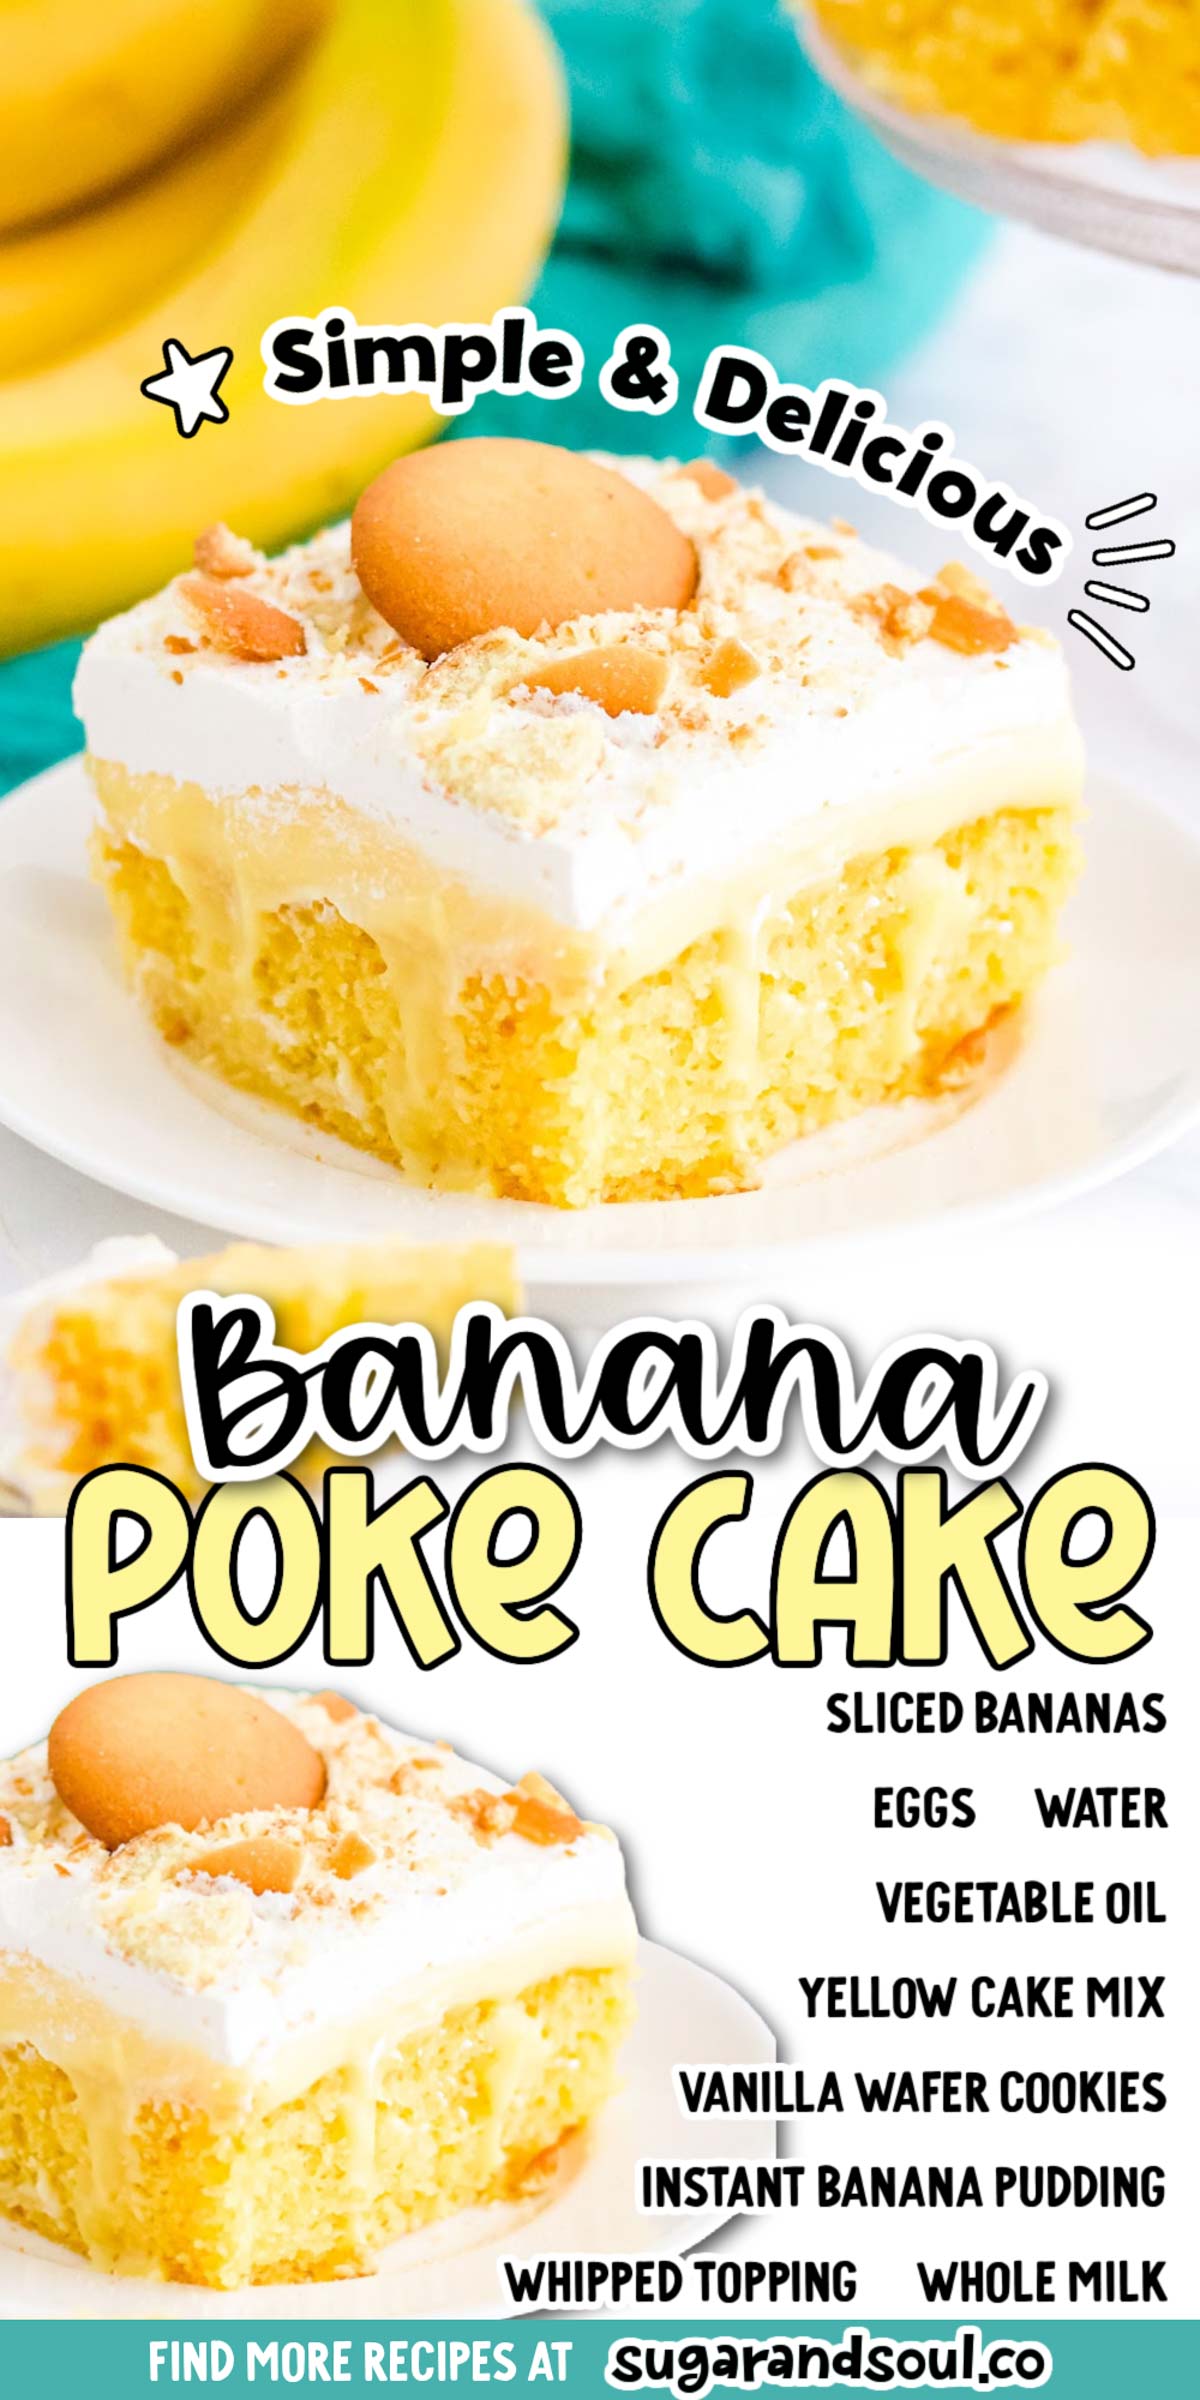 Banana Pudding Poke Cake is an easy-to-make dessert that's loaded with sweet banana flavor, preps with just 15 minutes of hands-on time! The perfect addition to all of those summertime BBQs! via @sugarandsoulco